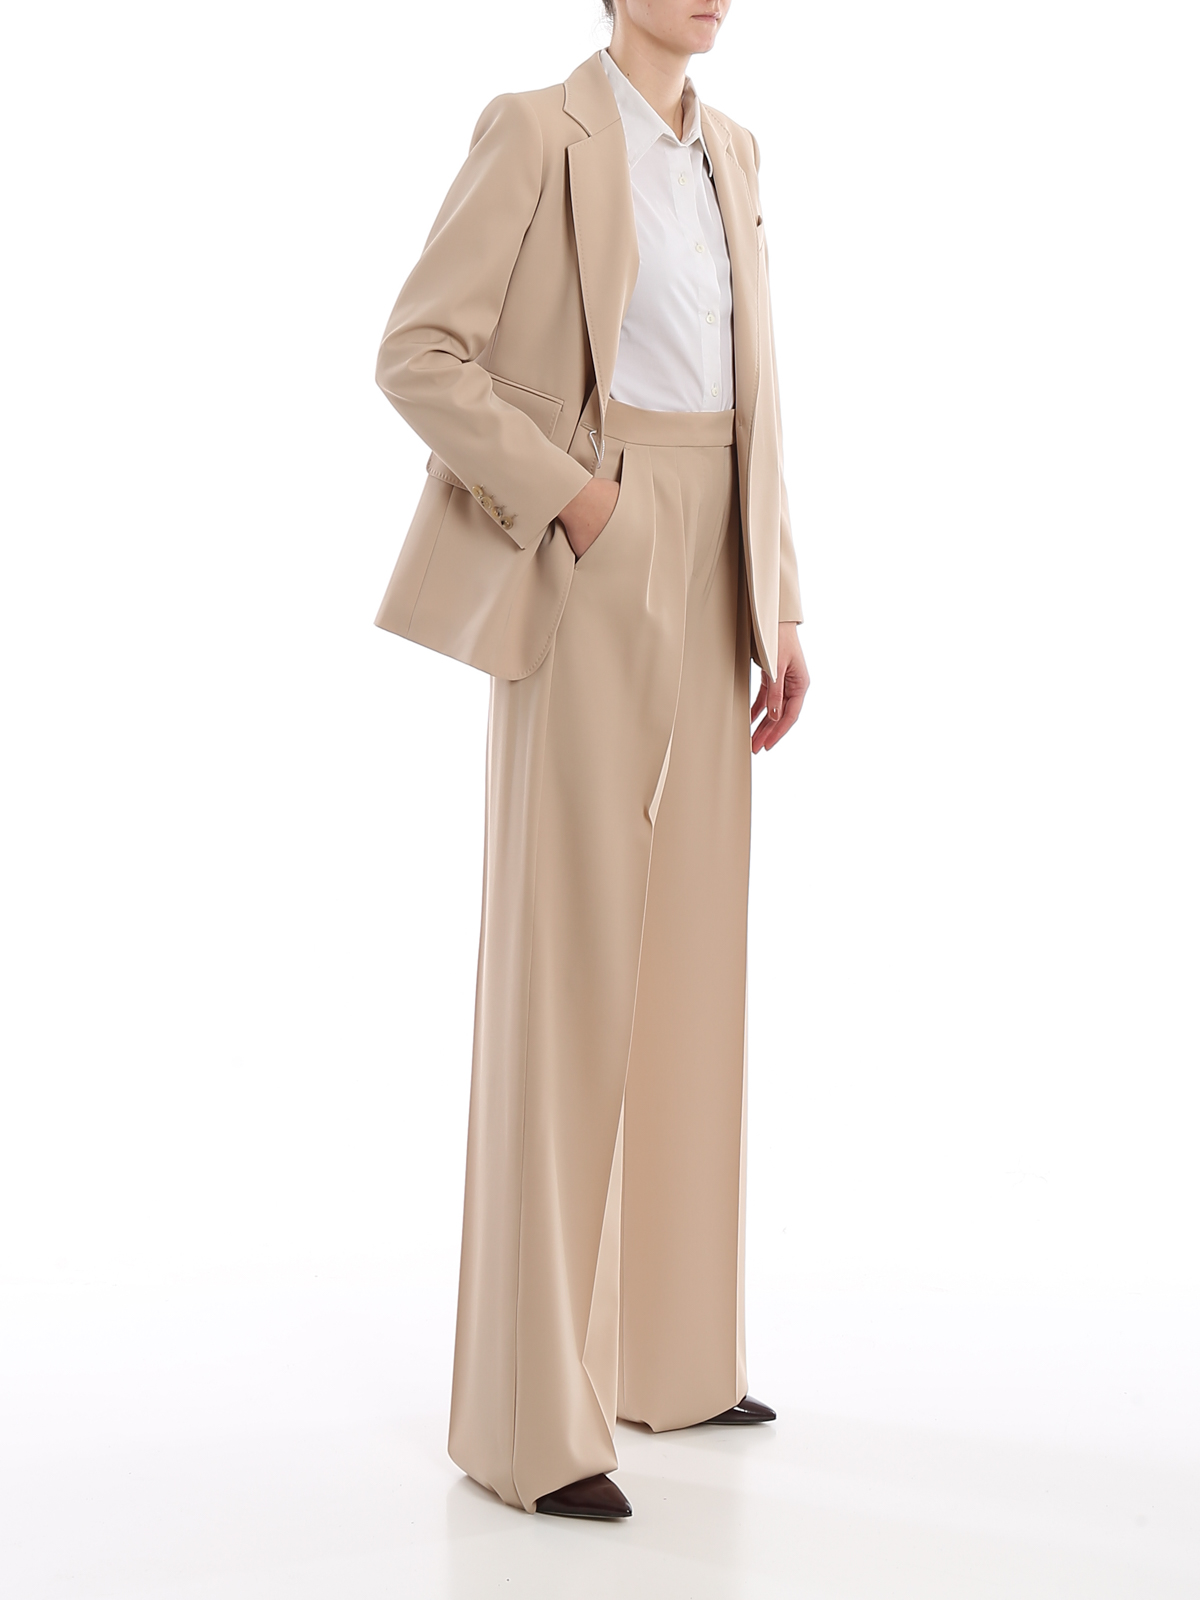 Max Mara 'Lince' trousers | Lovely Dress but Shame about the buttons |  Women's Clothing | GenesinlifeShops